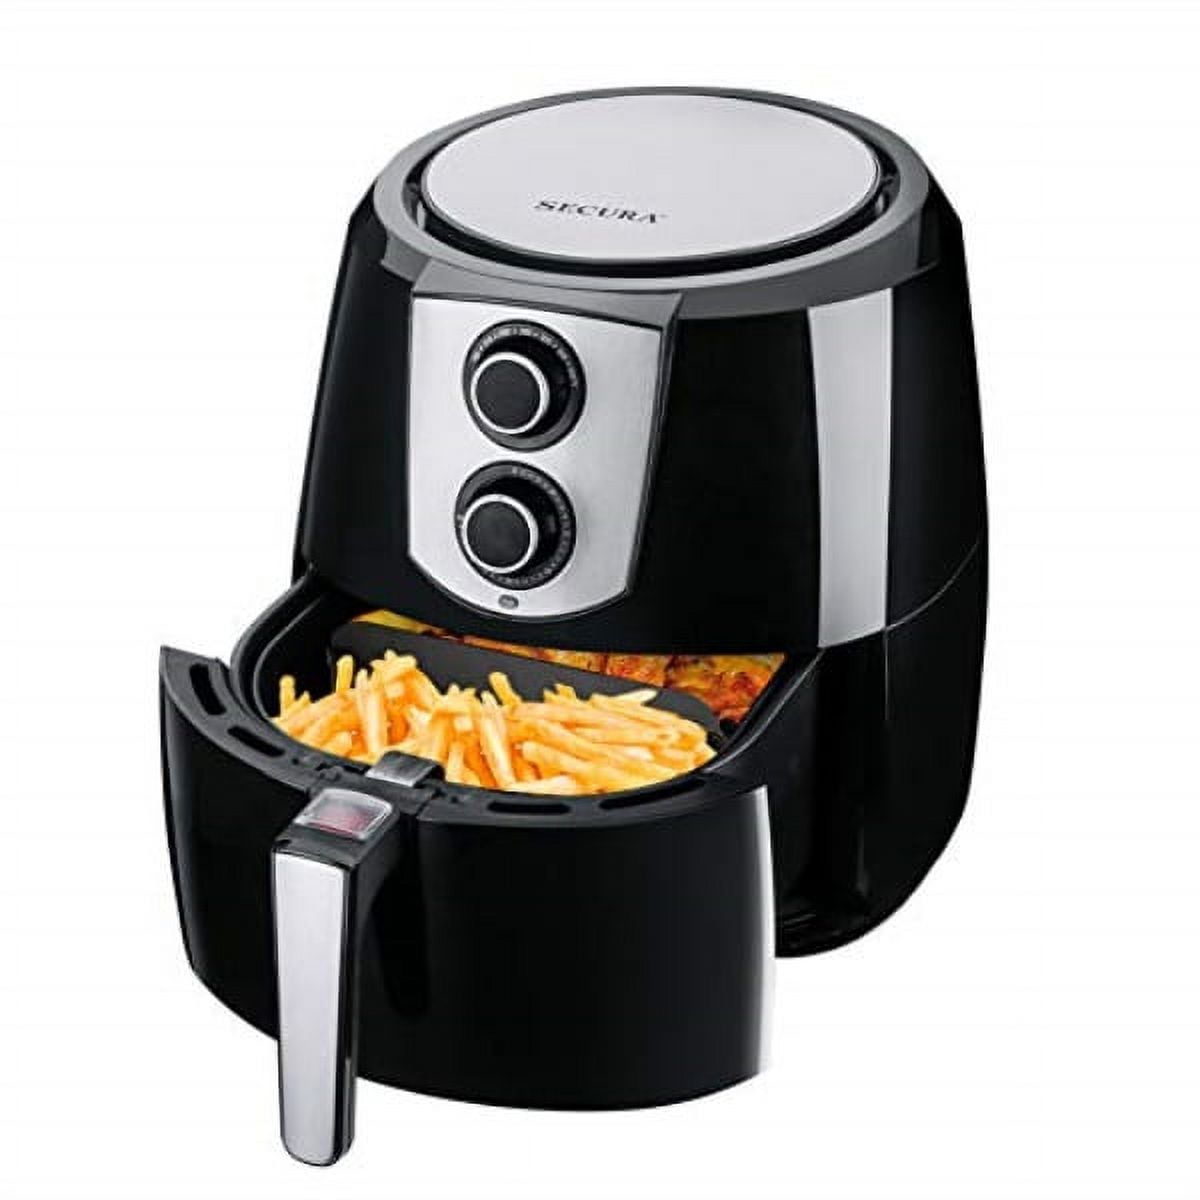 Air fryer 220V 800W Smart Electric Air Fryer 360°Baking Deep Fried Without  Oil Home Cooking Low Fat Adjustable Timing (Color : WHITE, Size : SINGLE